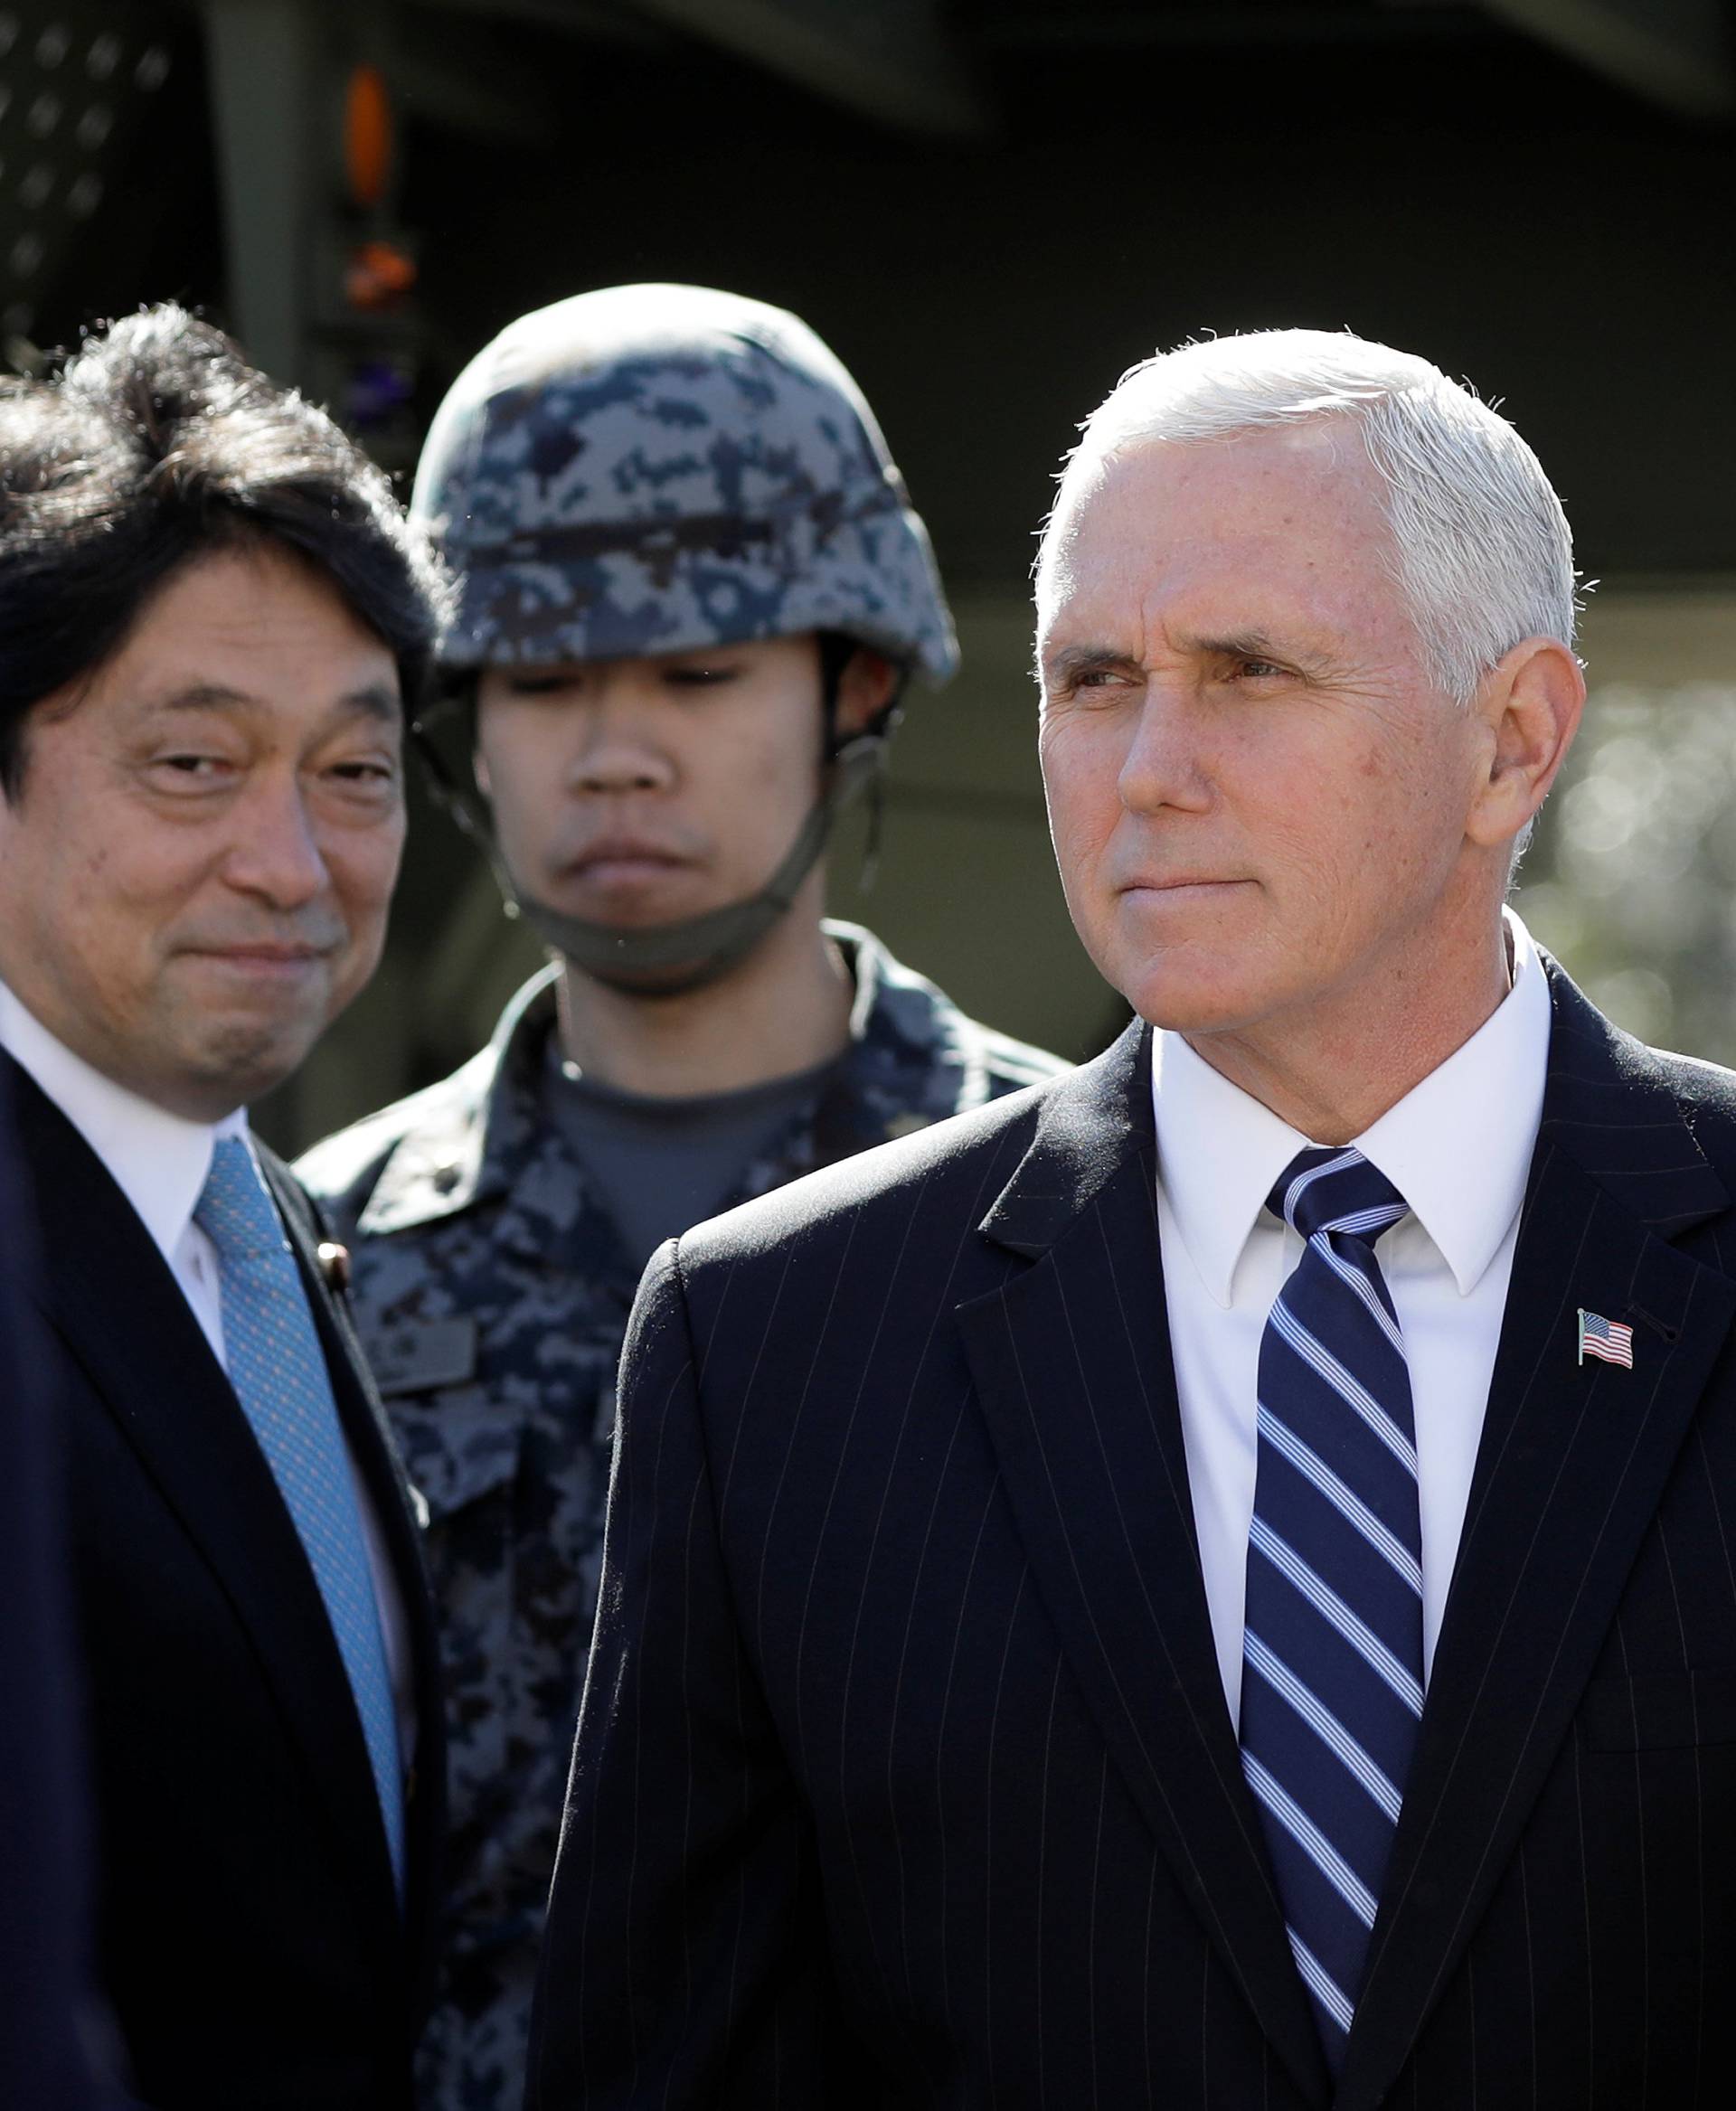 U.S. Vice President Mike Pence leaves after inspecting the Patriot Advanced Capability-3 (PAC-3) missile launch system with Itsunori Onodera, Japan's defense minister, during a demonstration at the Ministry of Defense in Tokyo